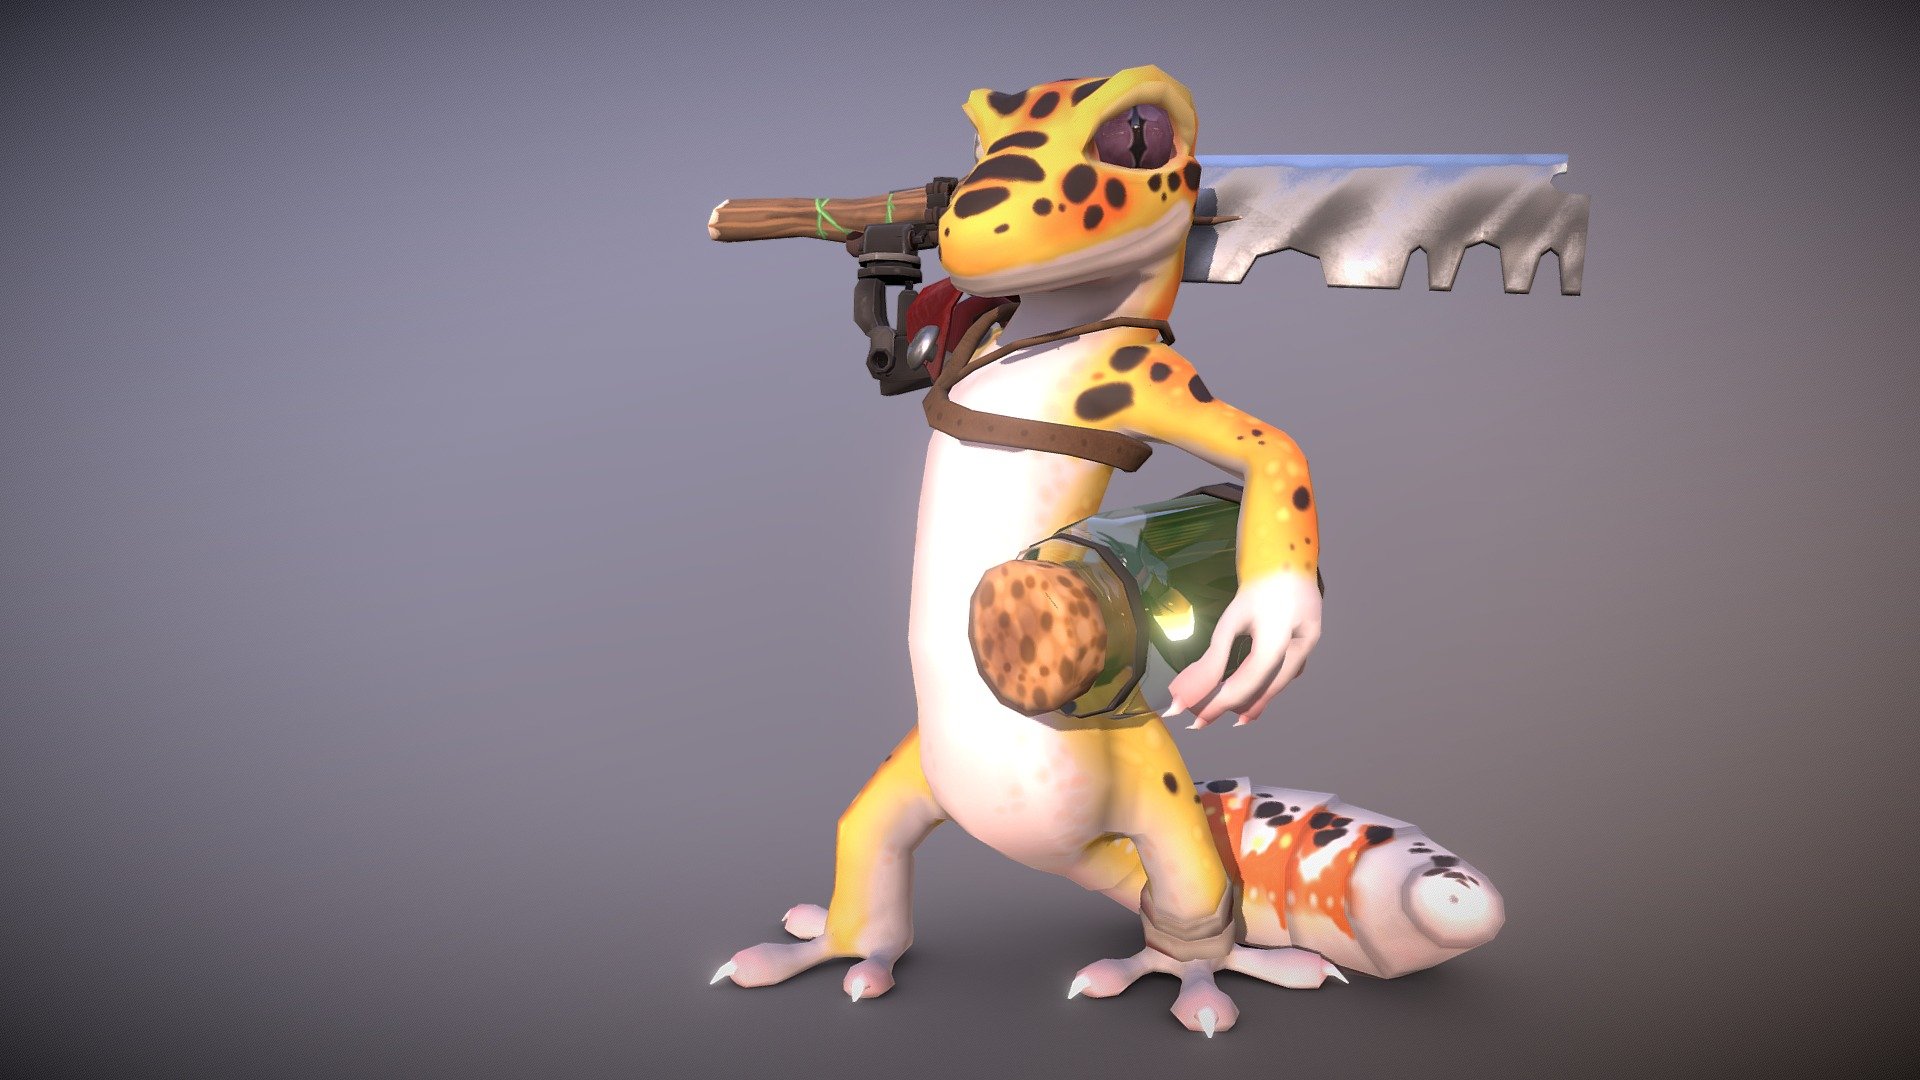 personal project that I did long ago in 3DS MAX 
(was my first character modeling in this software) 
Concept by https://sketchfab.com/rubiez 
Textured in Mudbox
Rigging and posing in Maya - Gecko Warrior - 3D model by Lepler 3d model